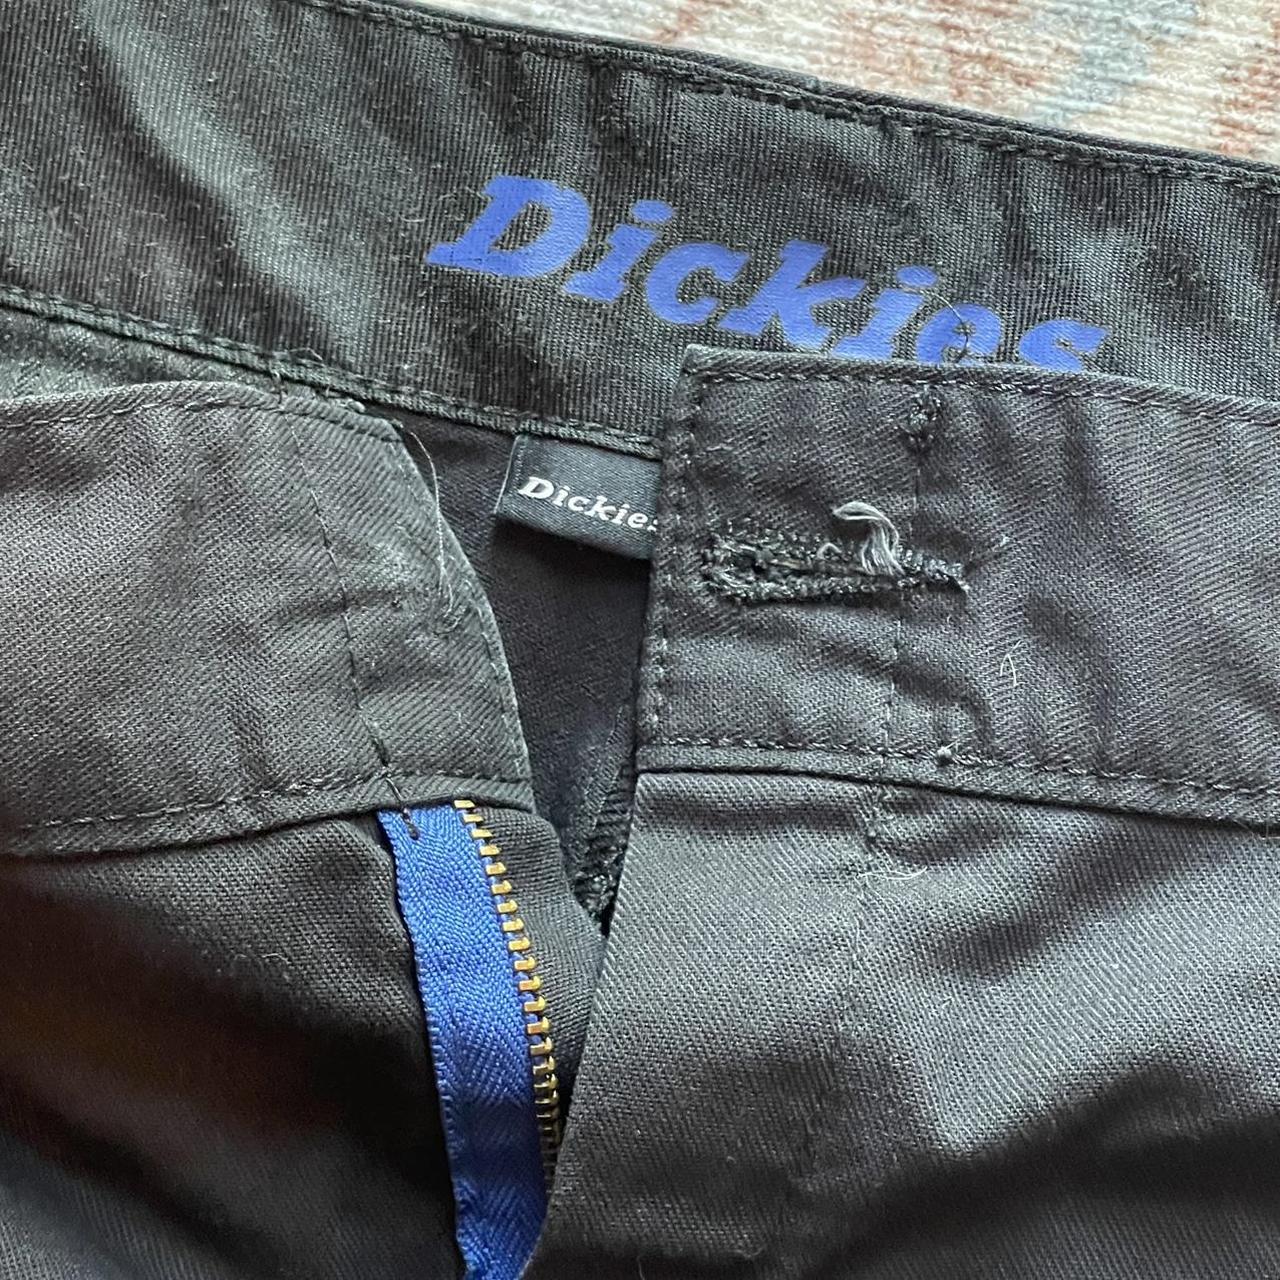 Dickies Cargo, Missing button!!! Size 30 #dickies - Depop